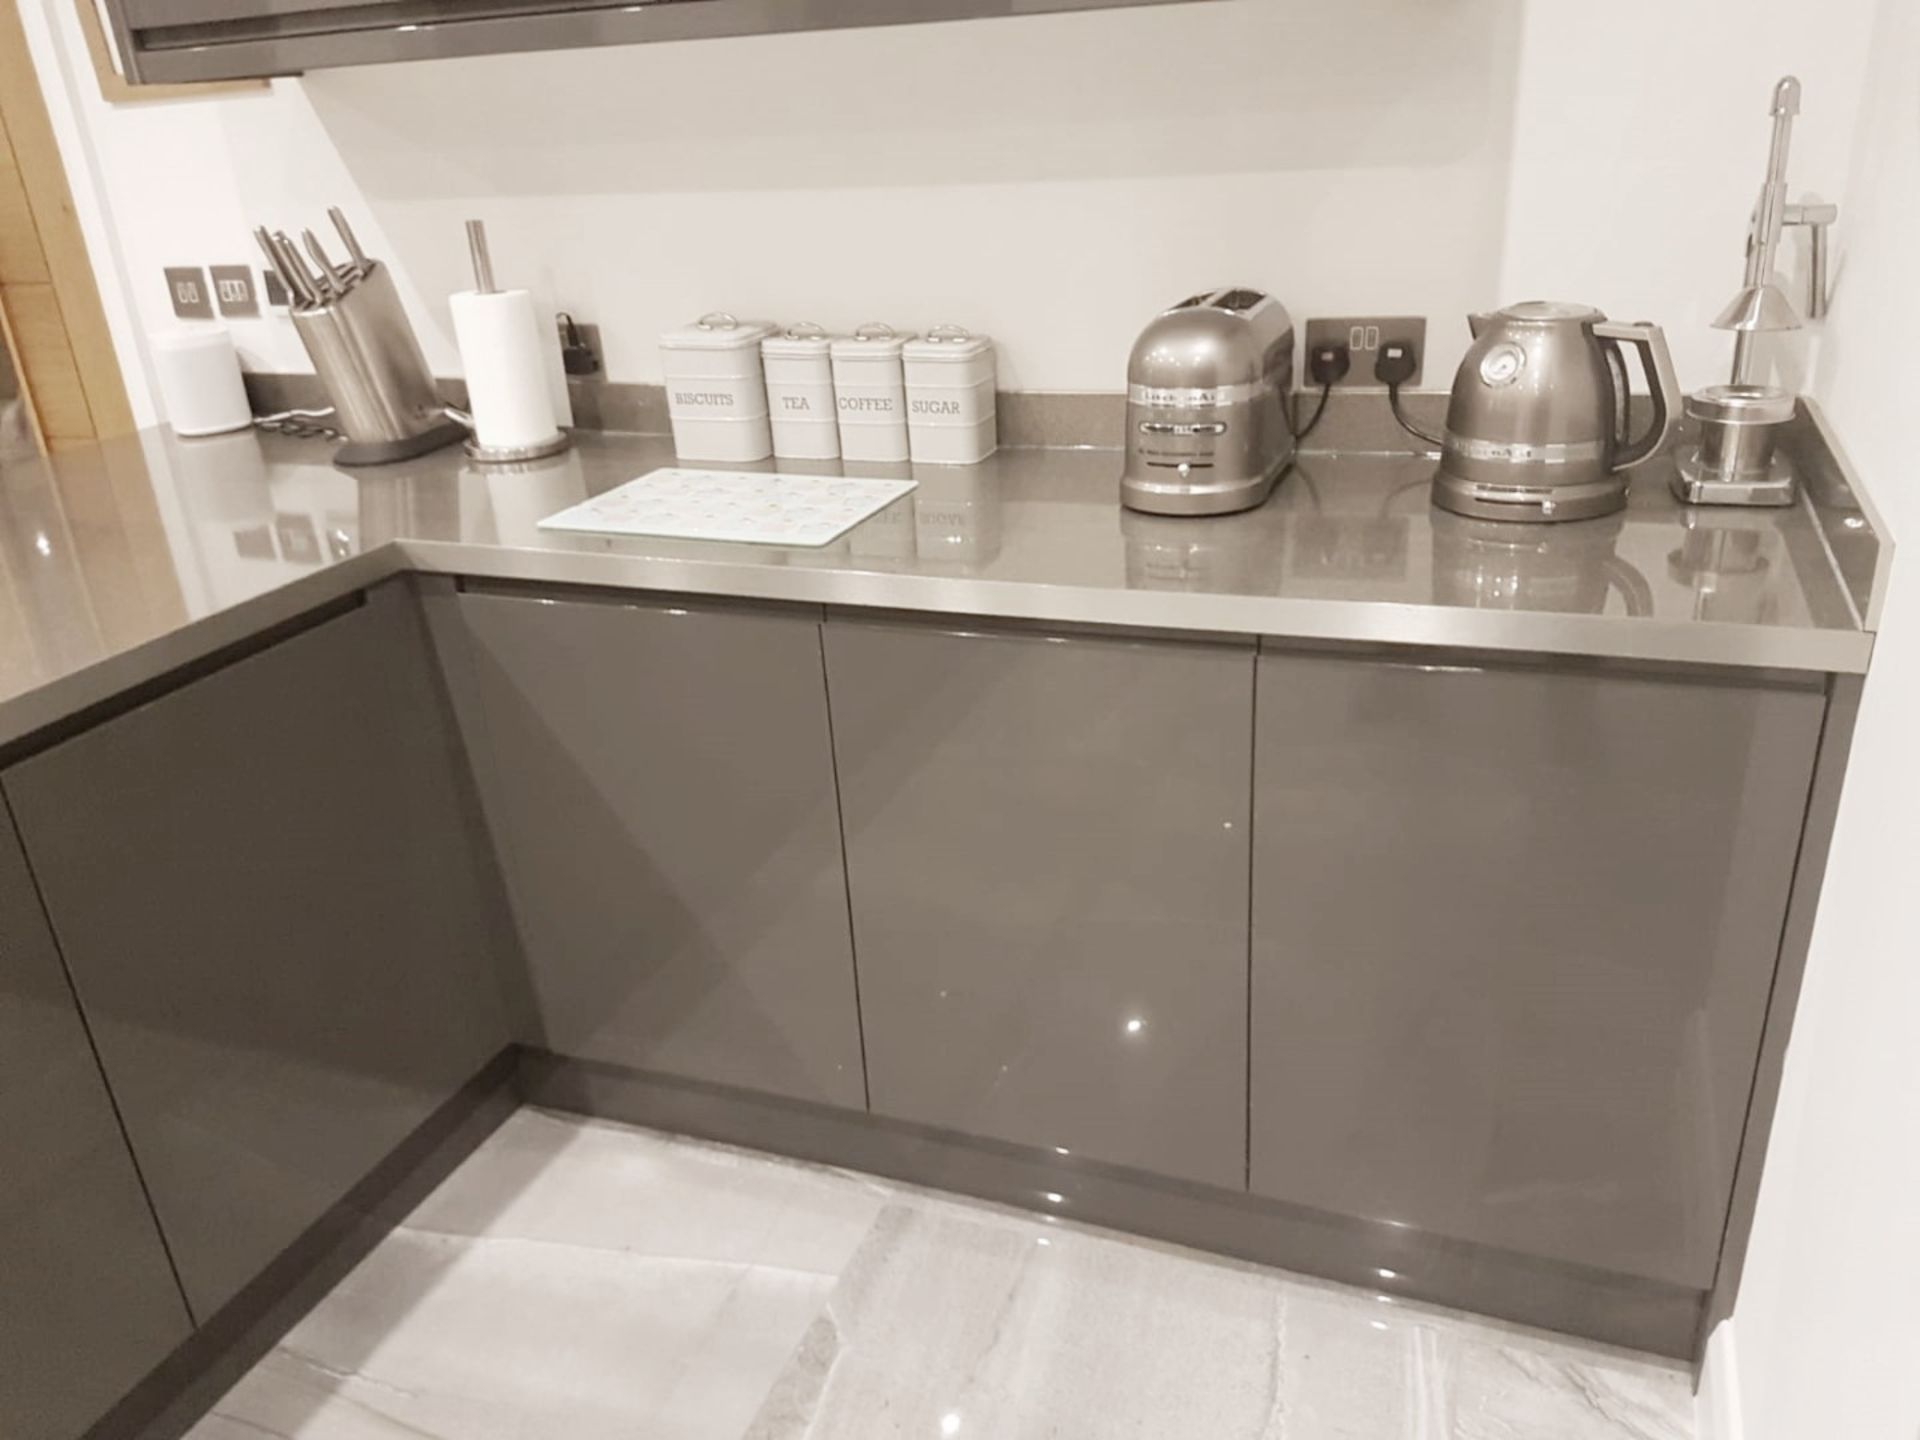 1 x Handleless Bespoke Fitted WREN Kitchen With Integrated Neff Appliances And Laminate Worktops - Image 71 of 72